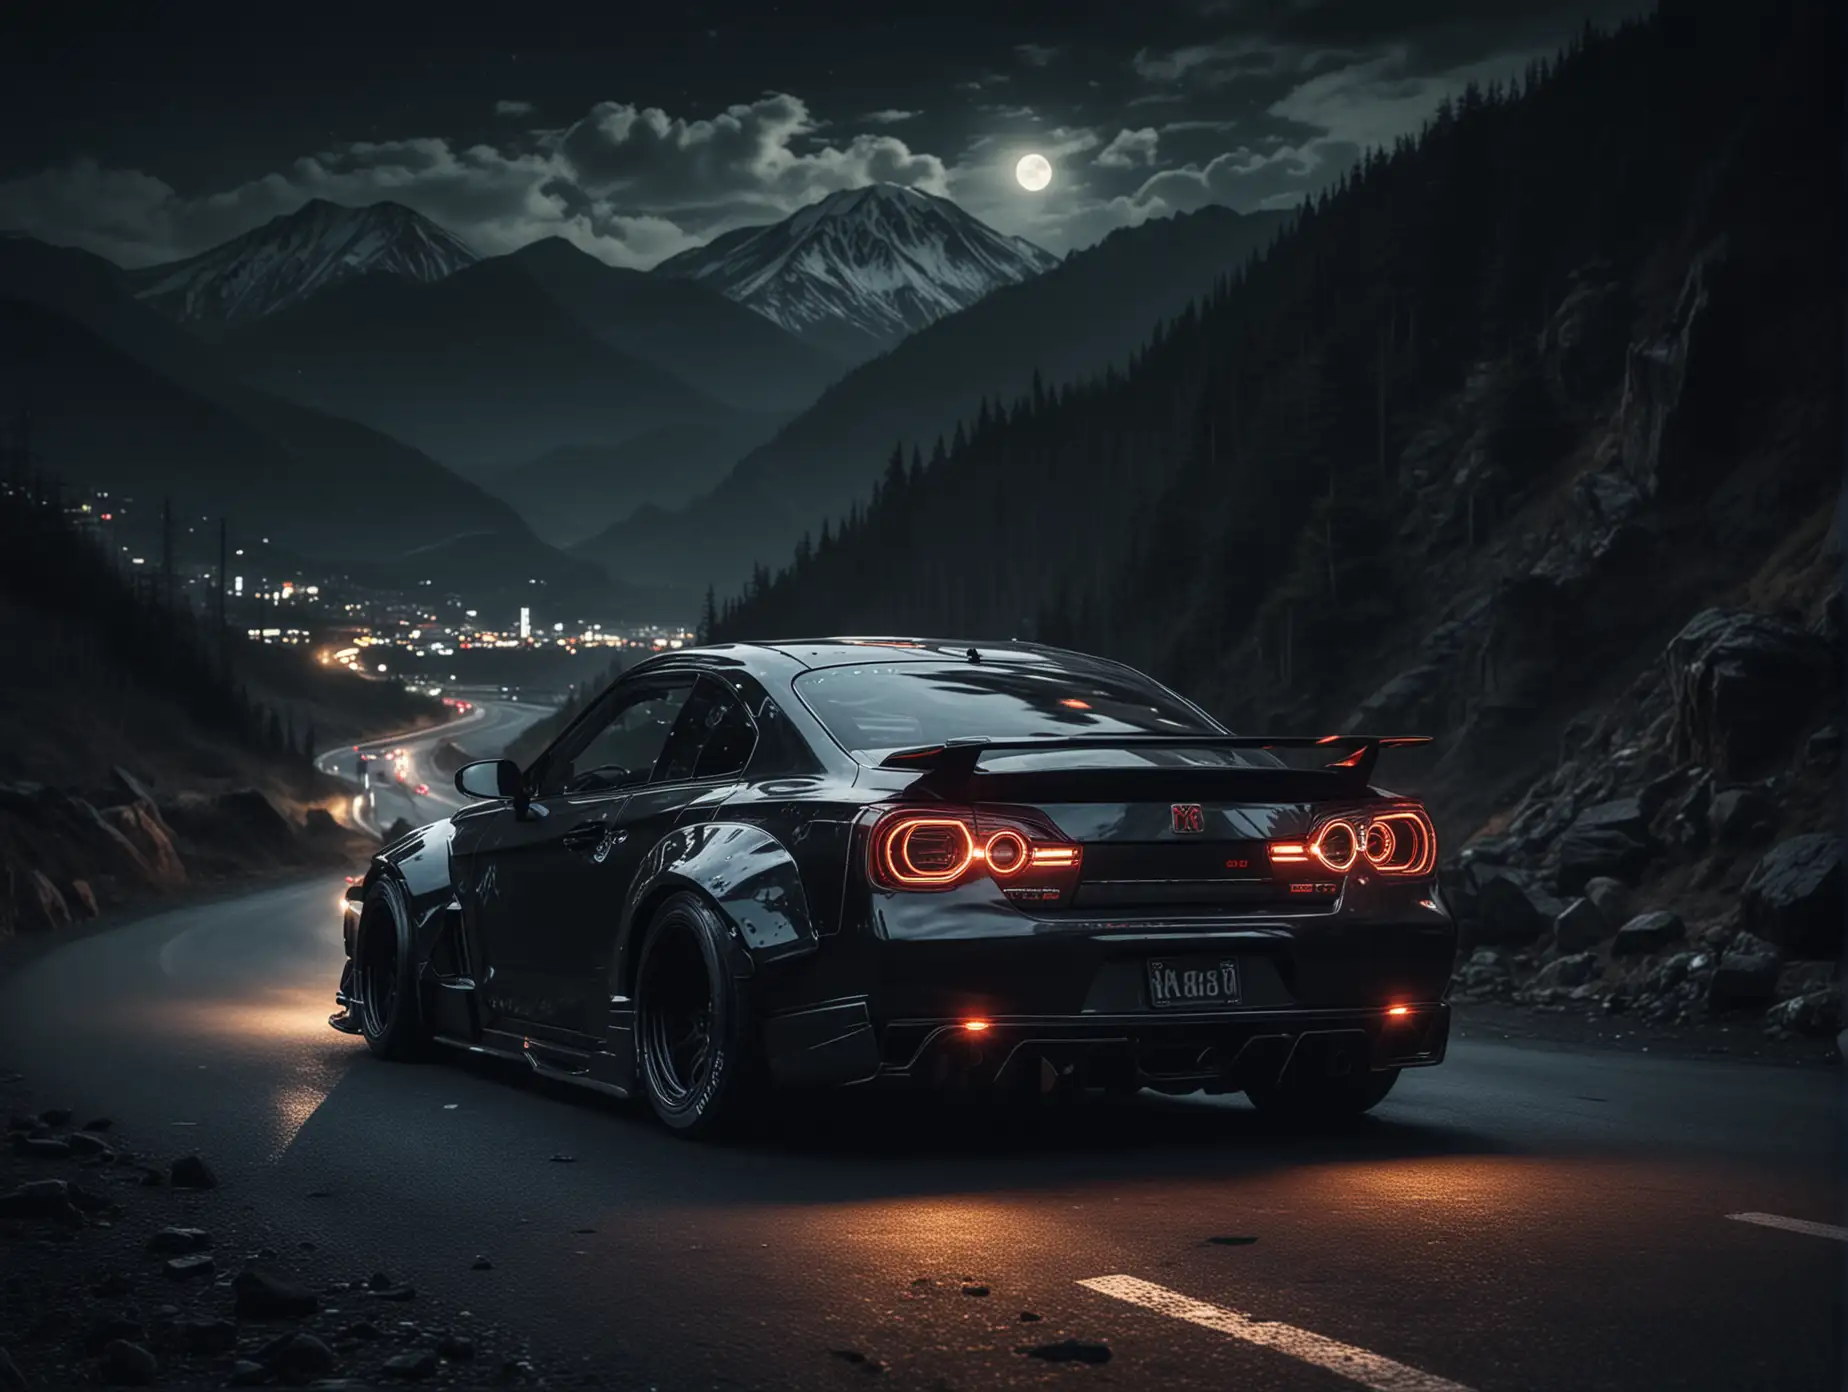 Create futuristic Japanese cars sport tuning type monsters with big Wells driving at night in the mountains background black dark color rear view from far